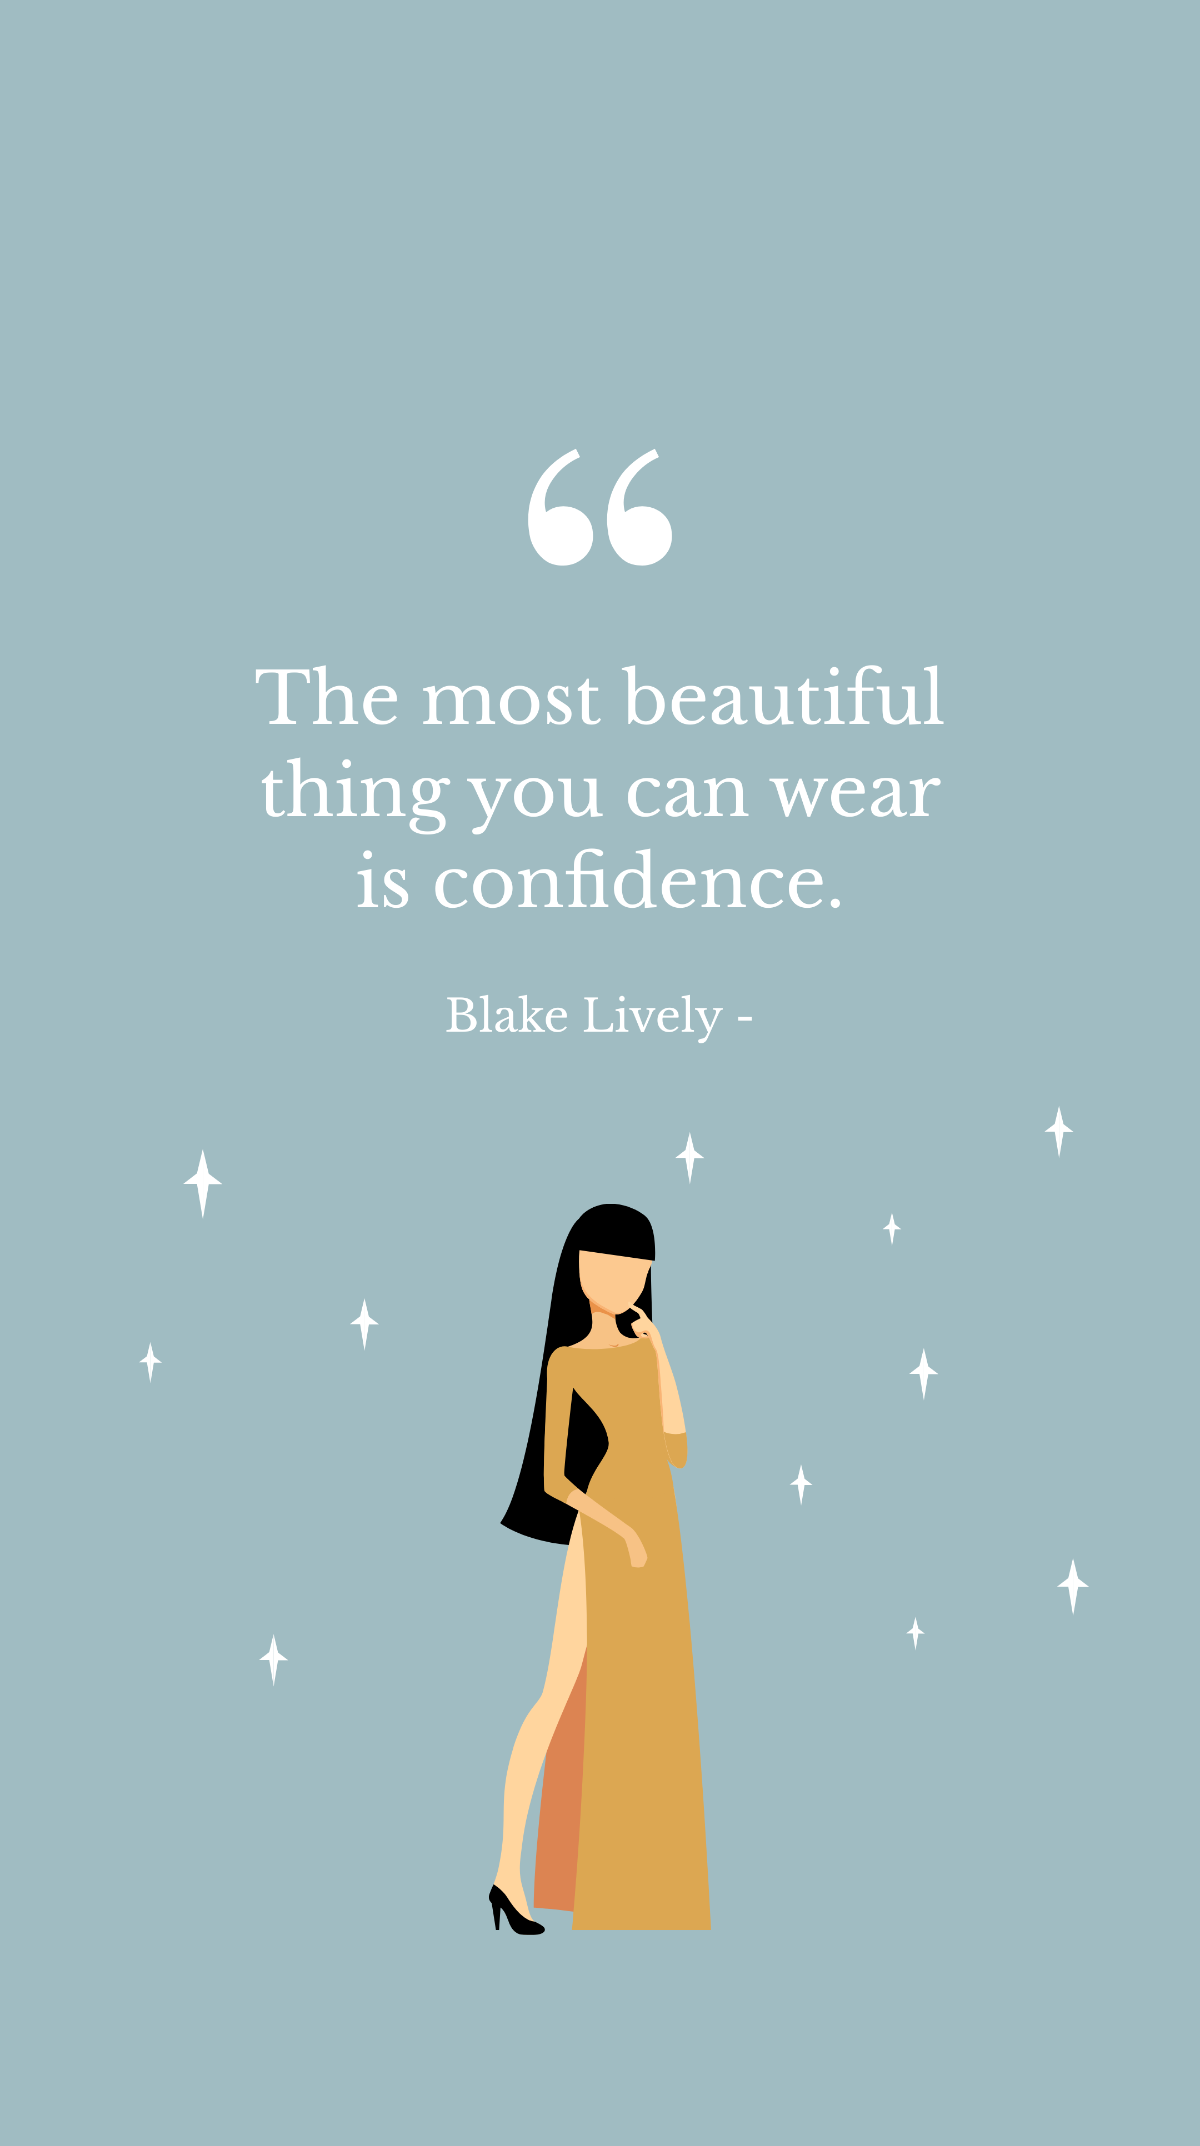 Blake Lively - The most beautiful thing you can wear is confidence. Template